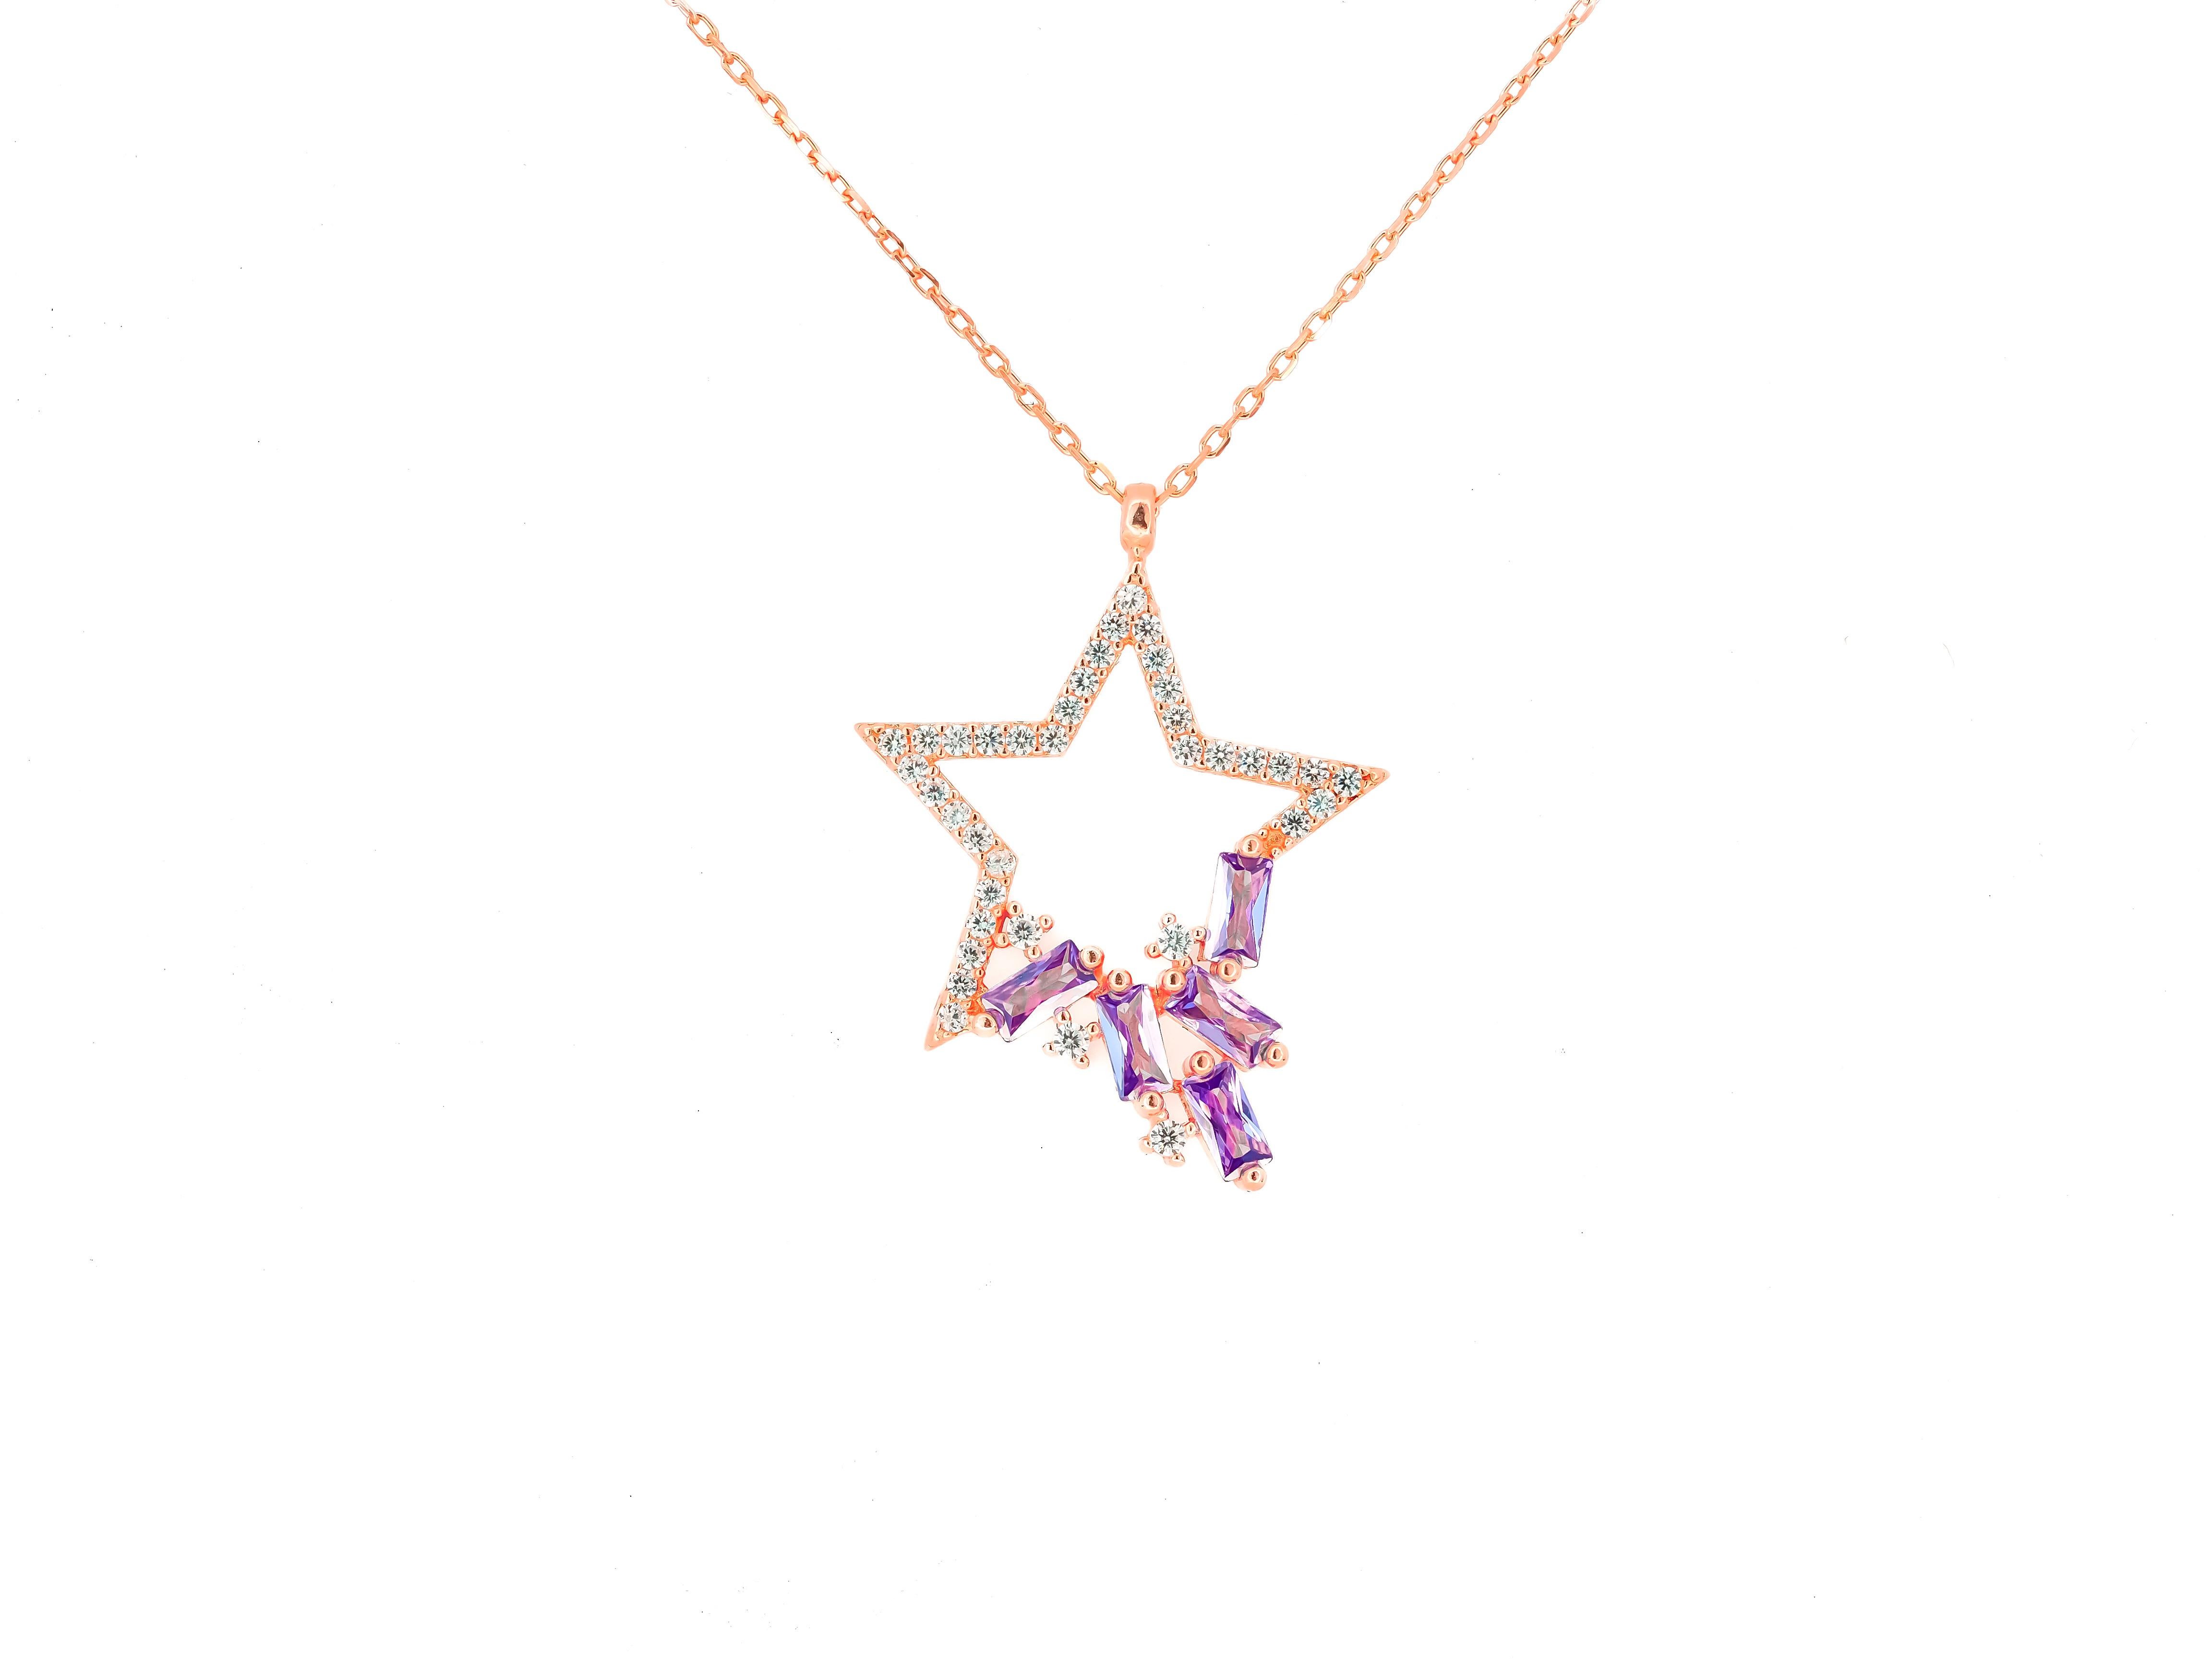 Star 14k gold pendant necklace with diamonds and amethysts. Chain necklace with star pendant. 

Metal: 14k gold. 
Necklace lenght - 45 sm
Weight: 2.4 gr
Star pendant gemstones: diamonds, round brilliant cut, G/VS, weight aprox 0.4 ct.
Baguette cut